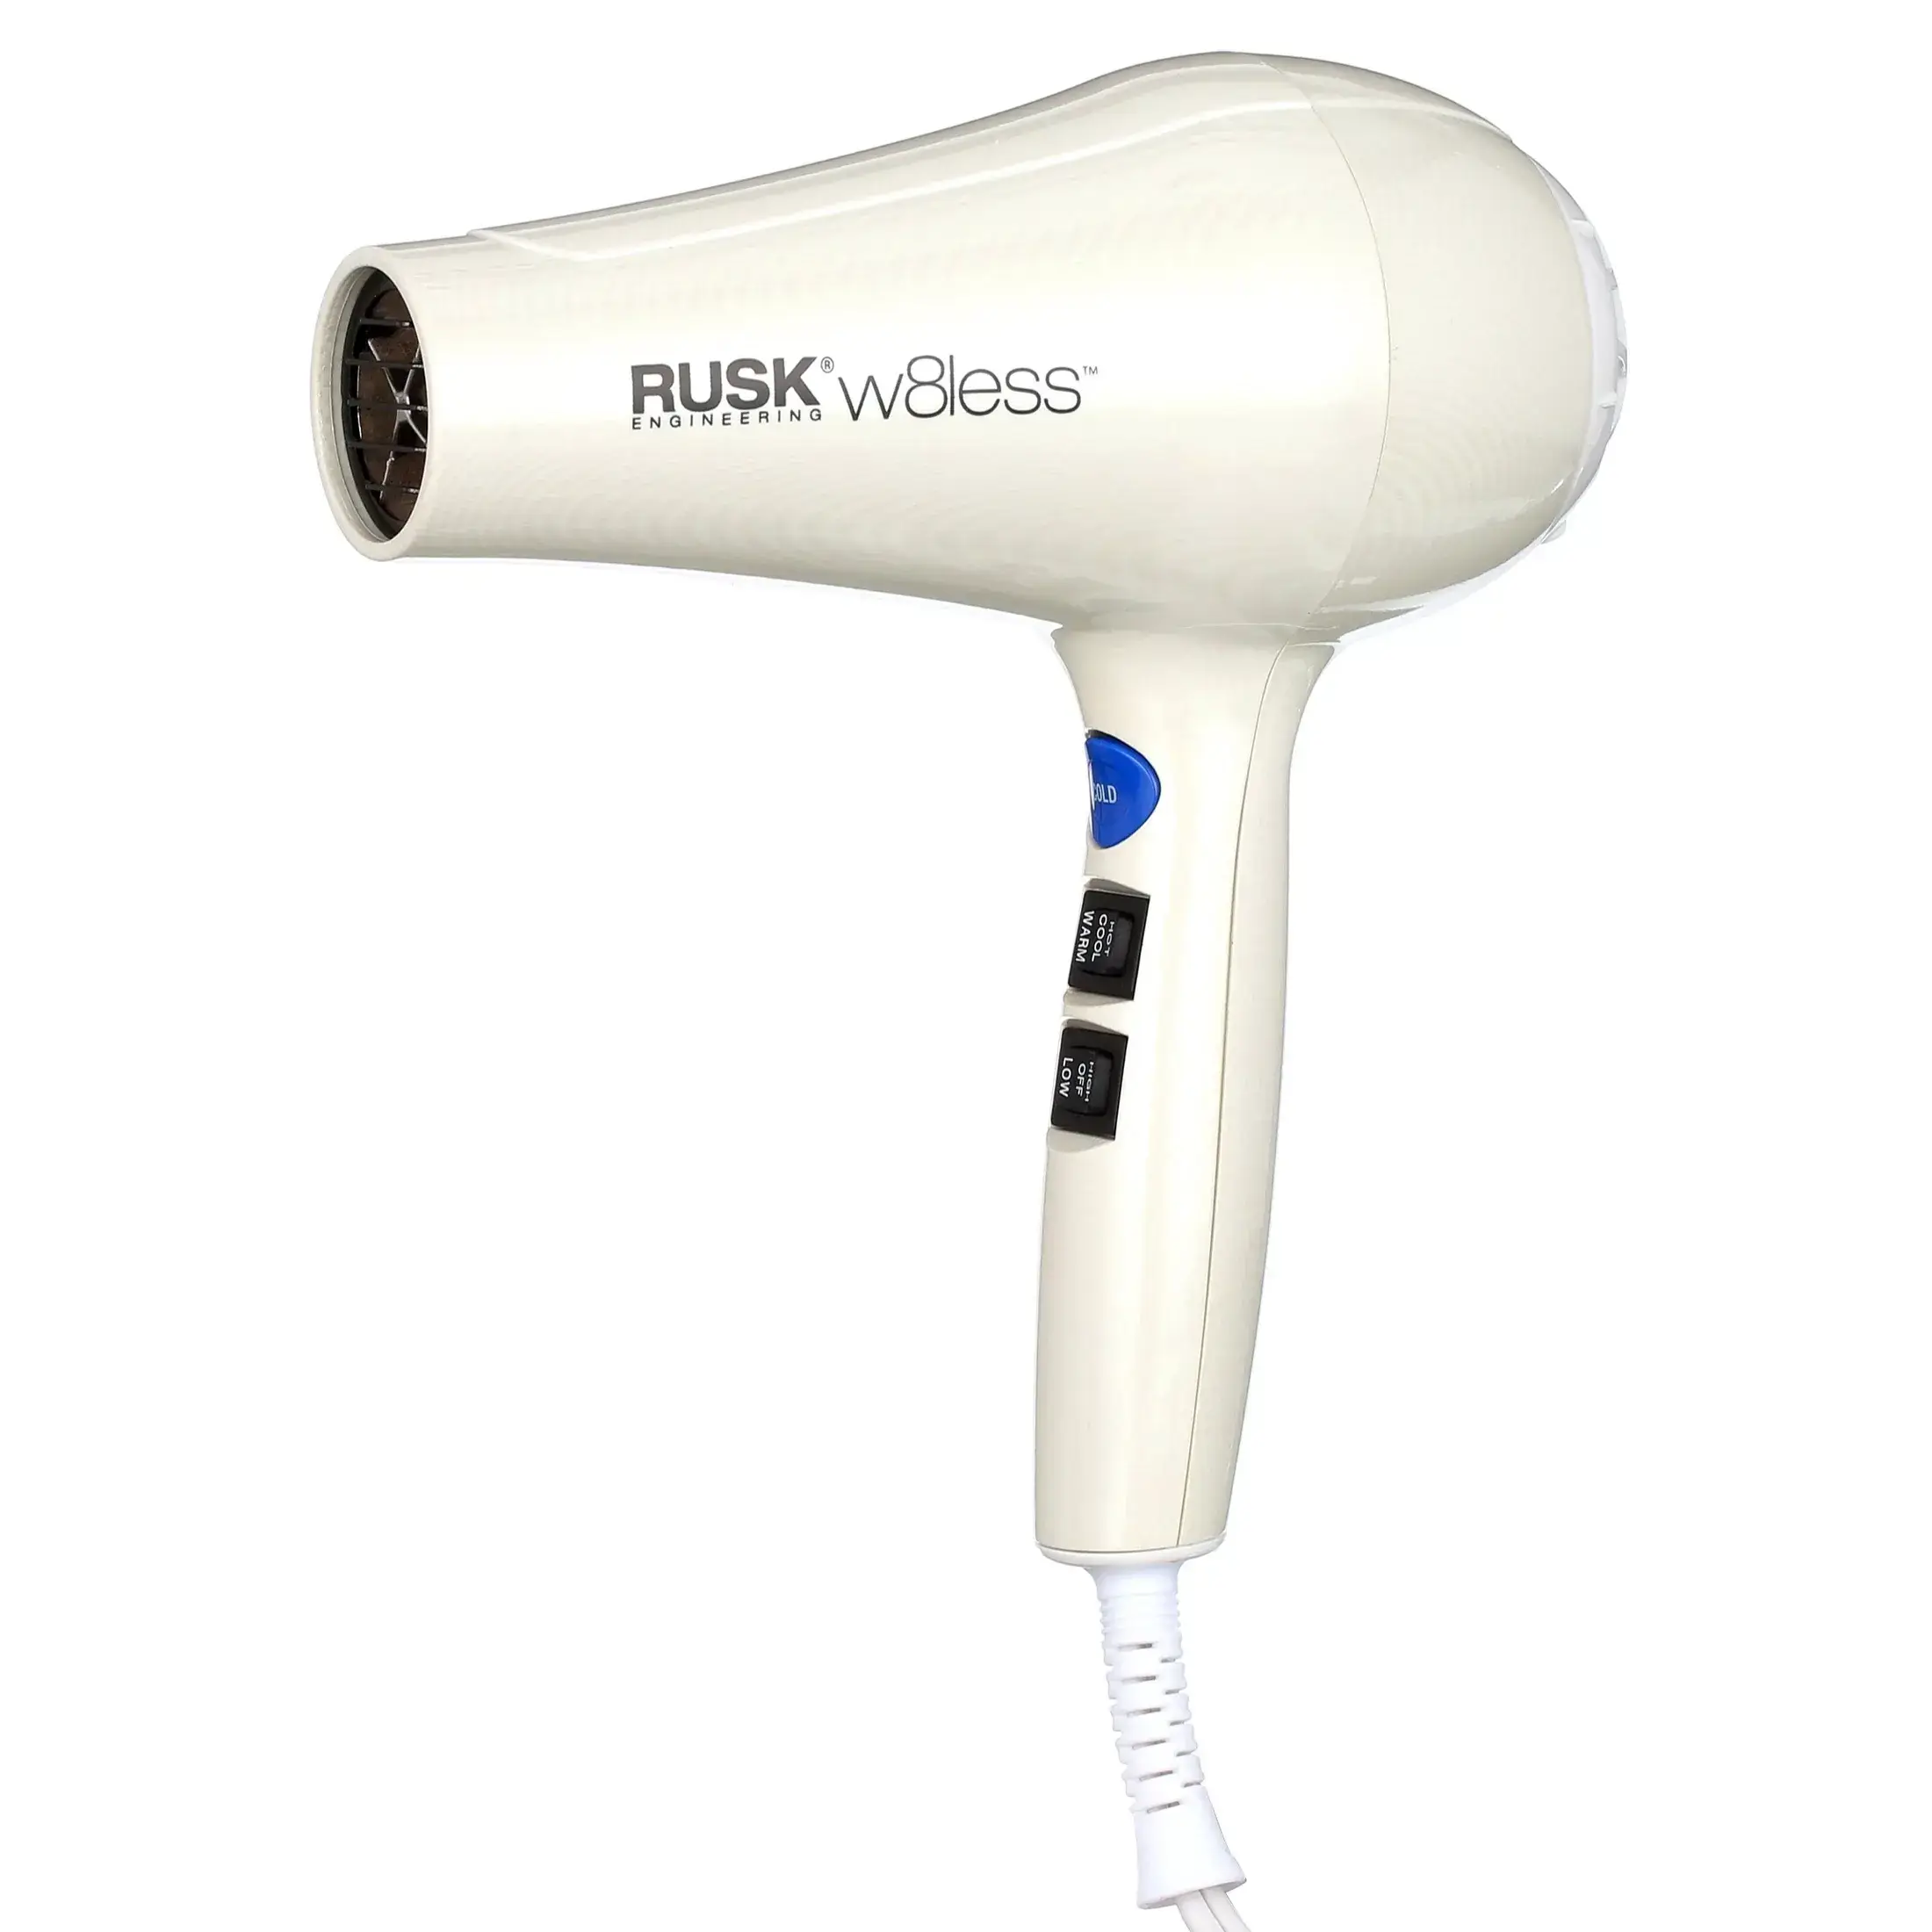 White Rusk W8less hair dryer with blue and black switches.